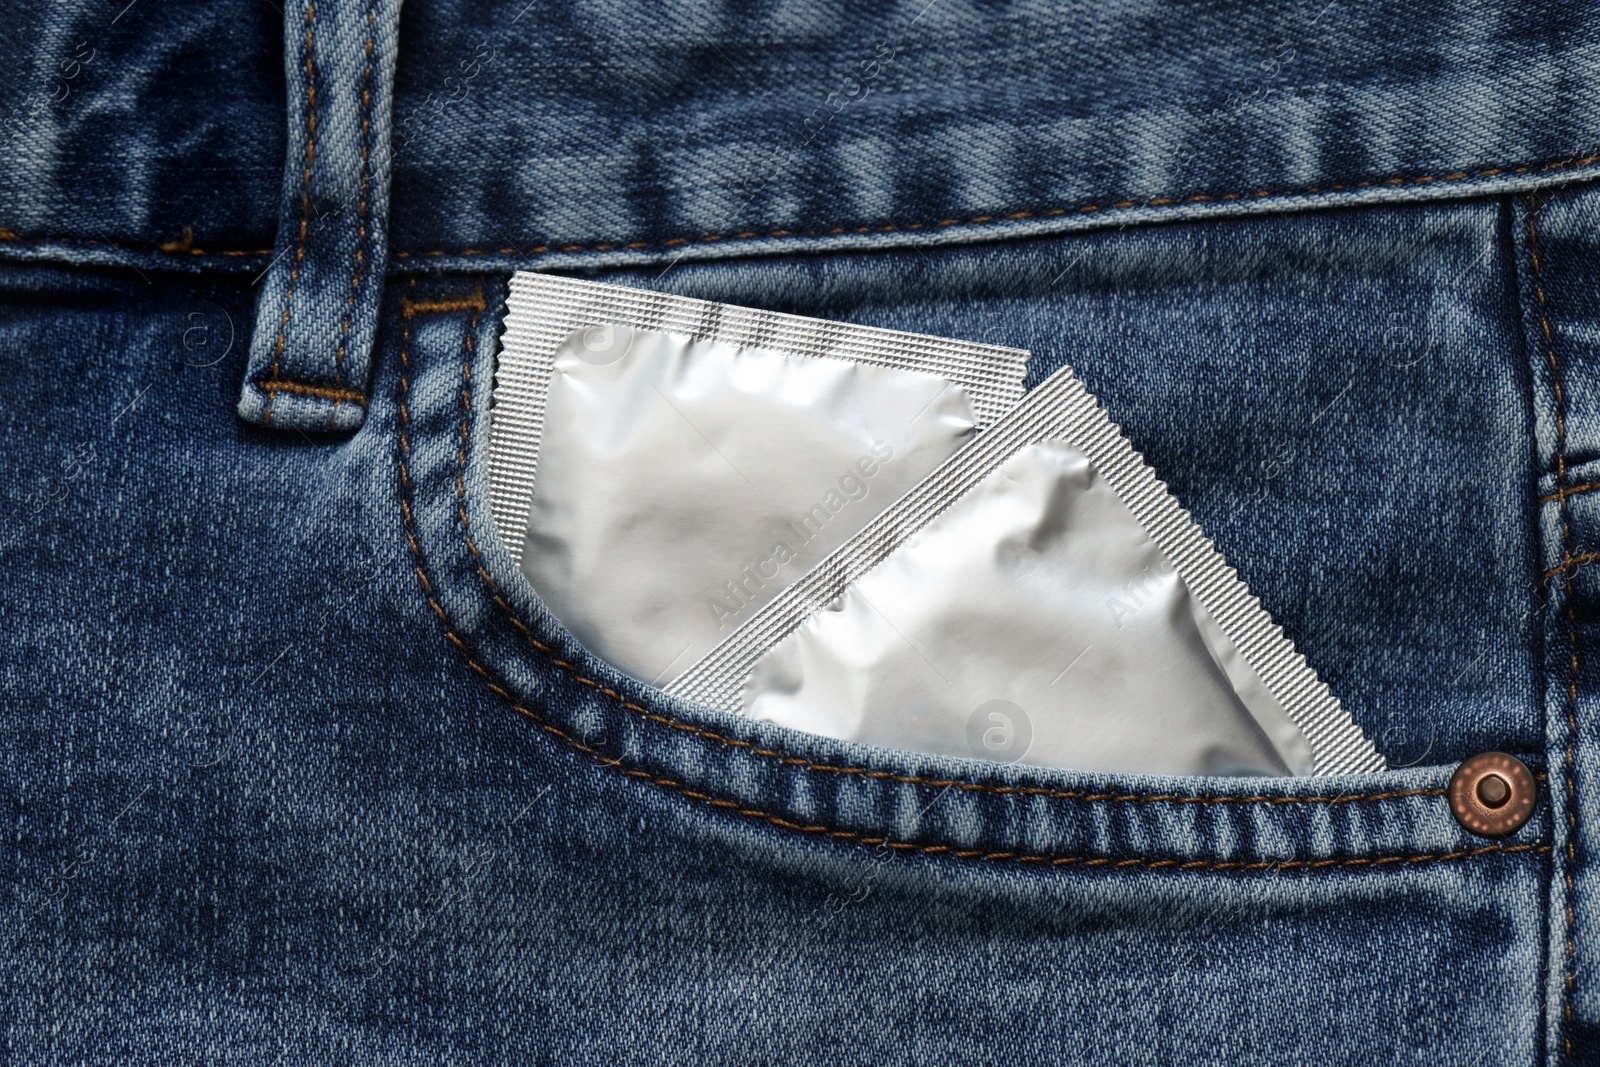 Photo of Packaged condoms in jeans pocket, closeup. Safe sex